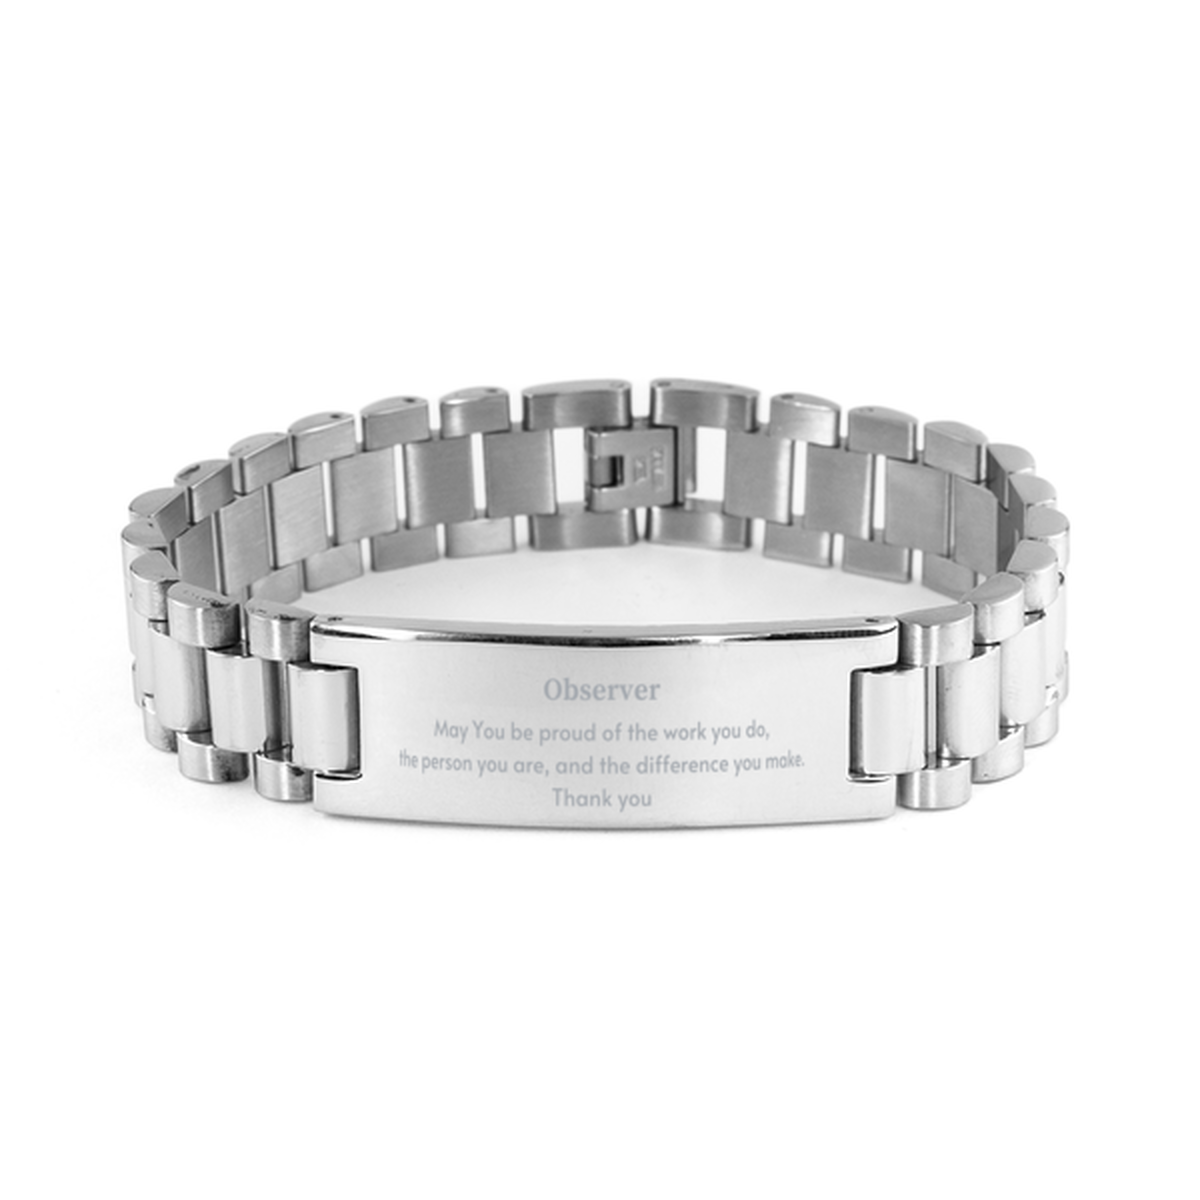 Heartwarming Ladder Stainless Steel Bracelet Retirement Coworkers Gifts for Observer, Observer May You be proud of the work you do, the person you are Gifts for Boss Men Women Friends